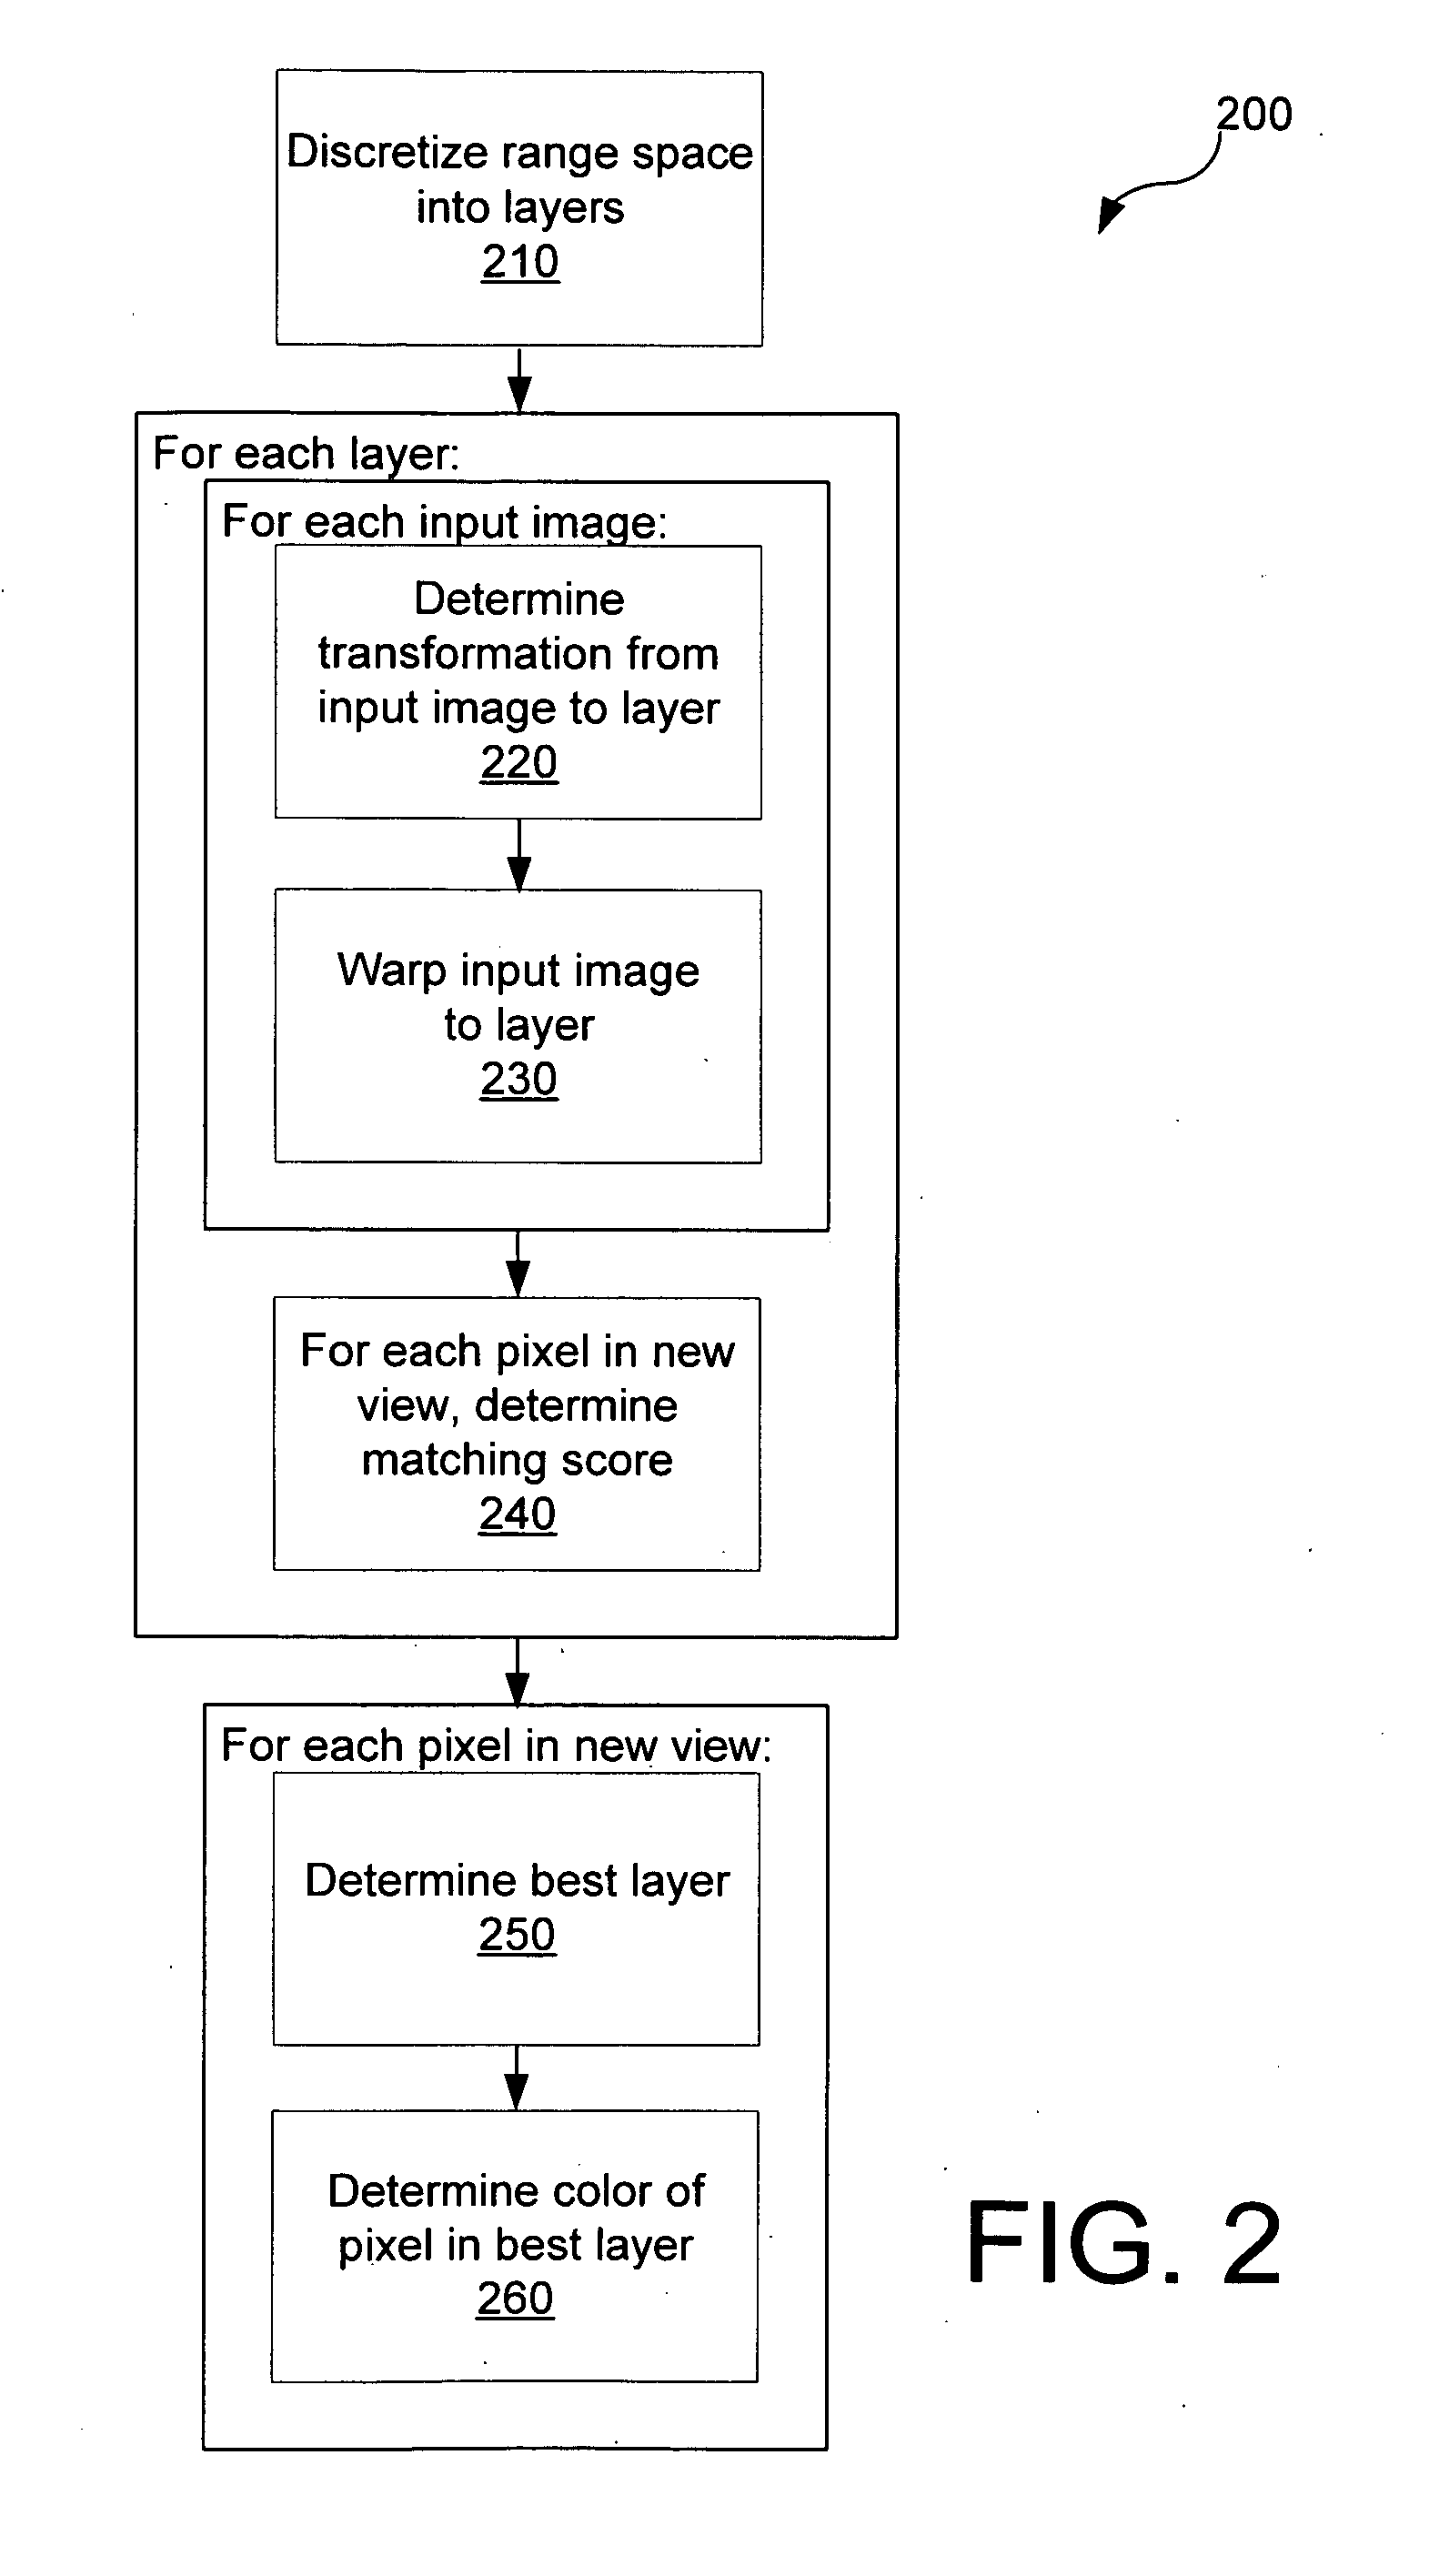 Systems and methods for directly generating a view using a layered approach